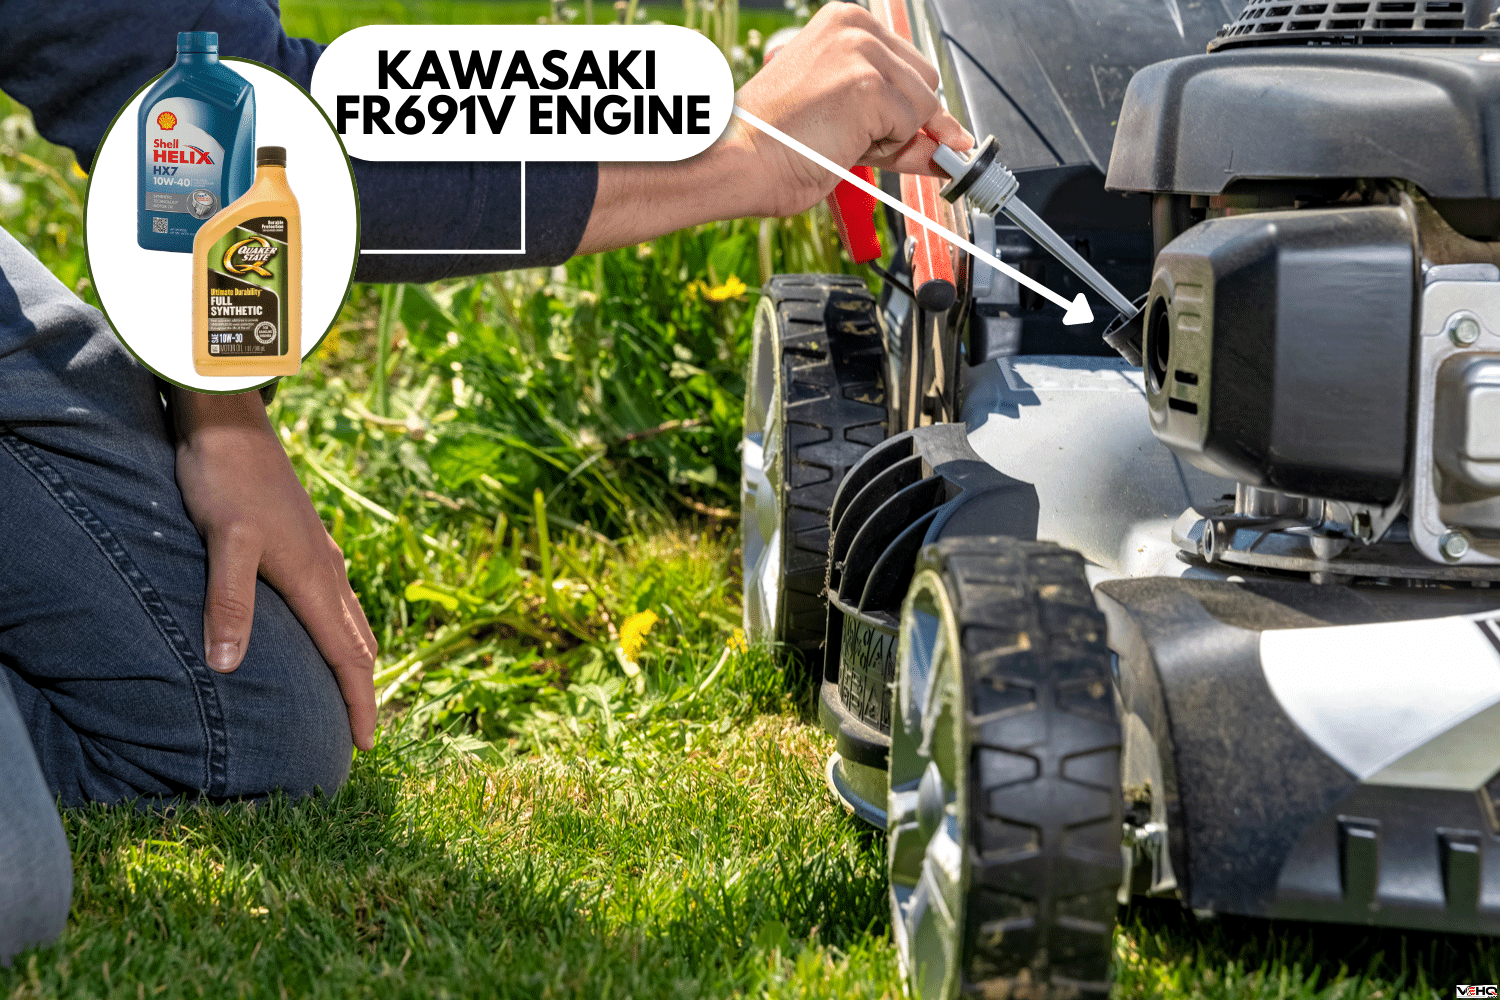 change and check the oil in the motor lawn mower, What Is The Best Oil For Kawasaki FR691V